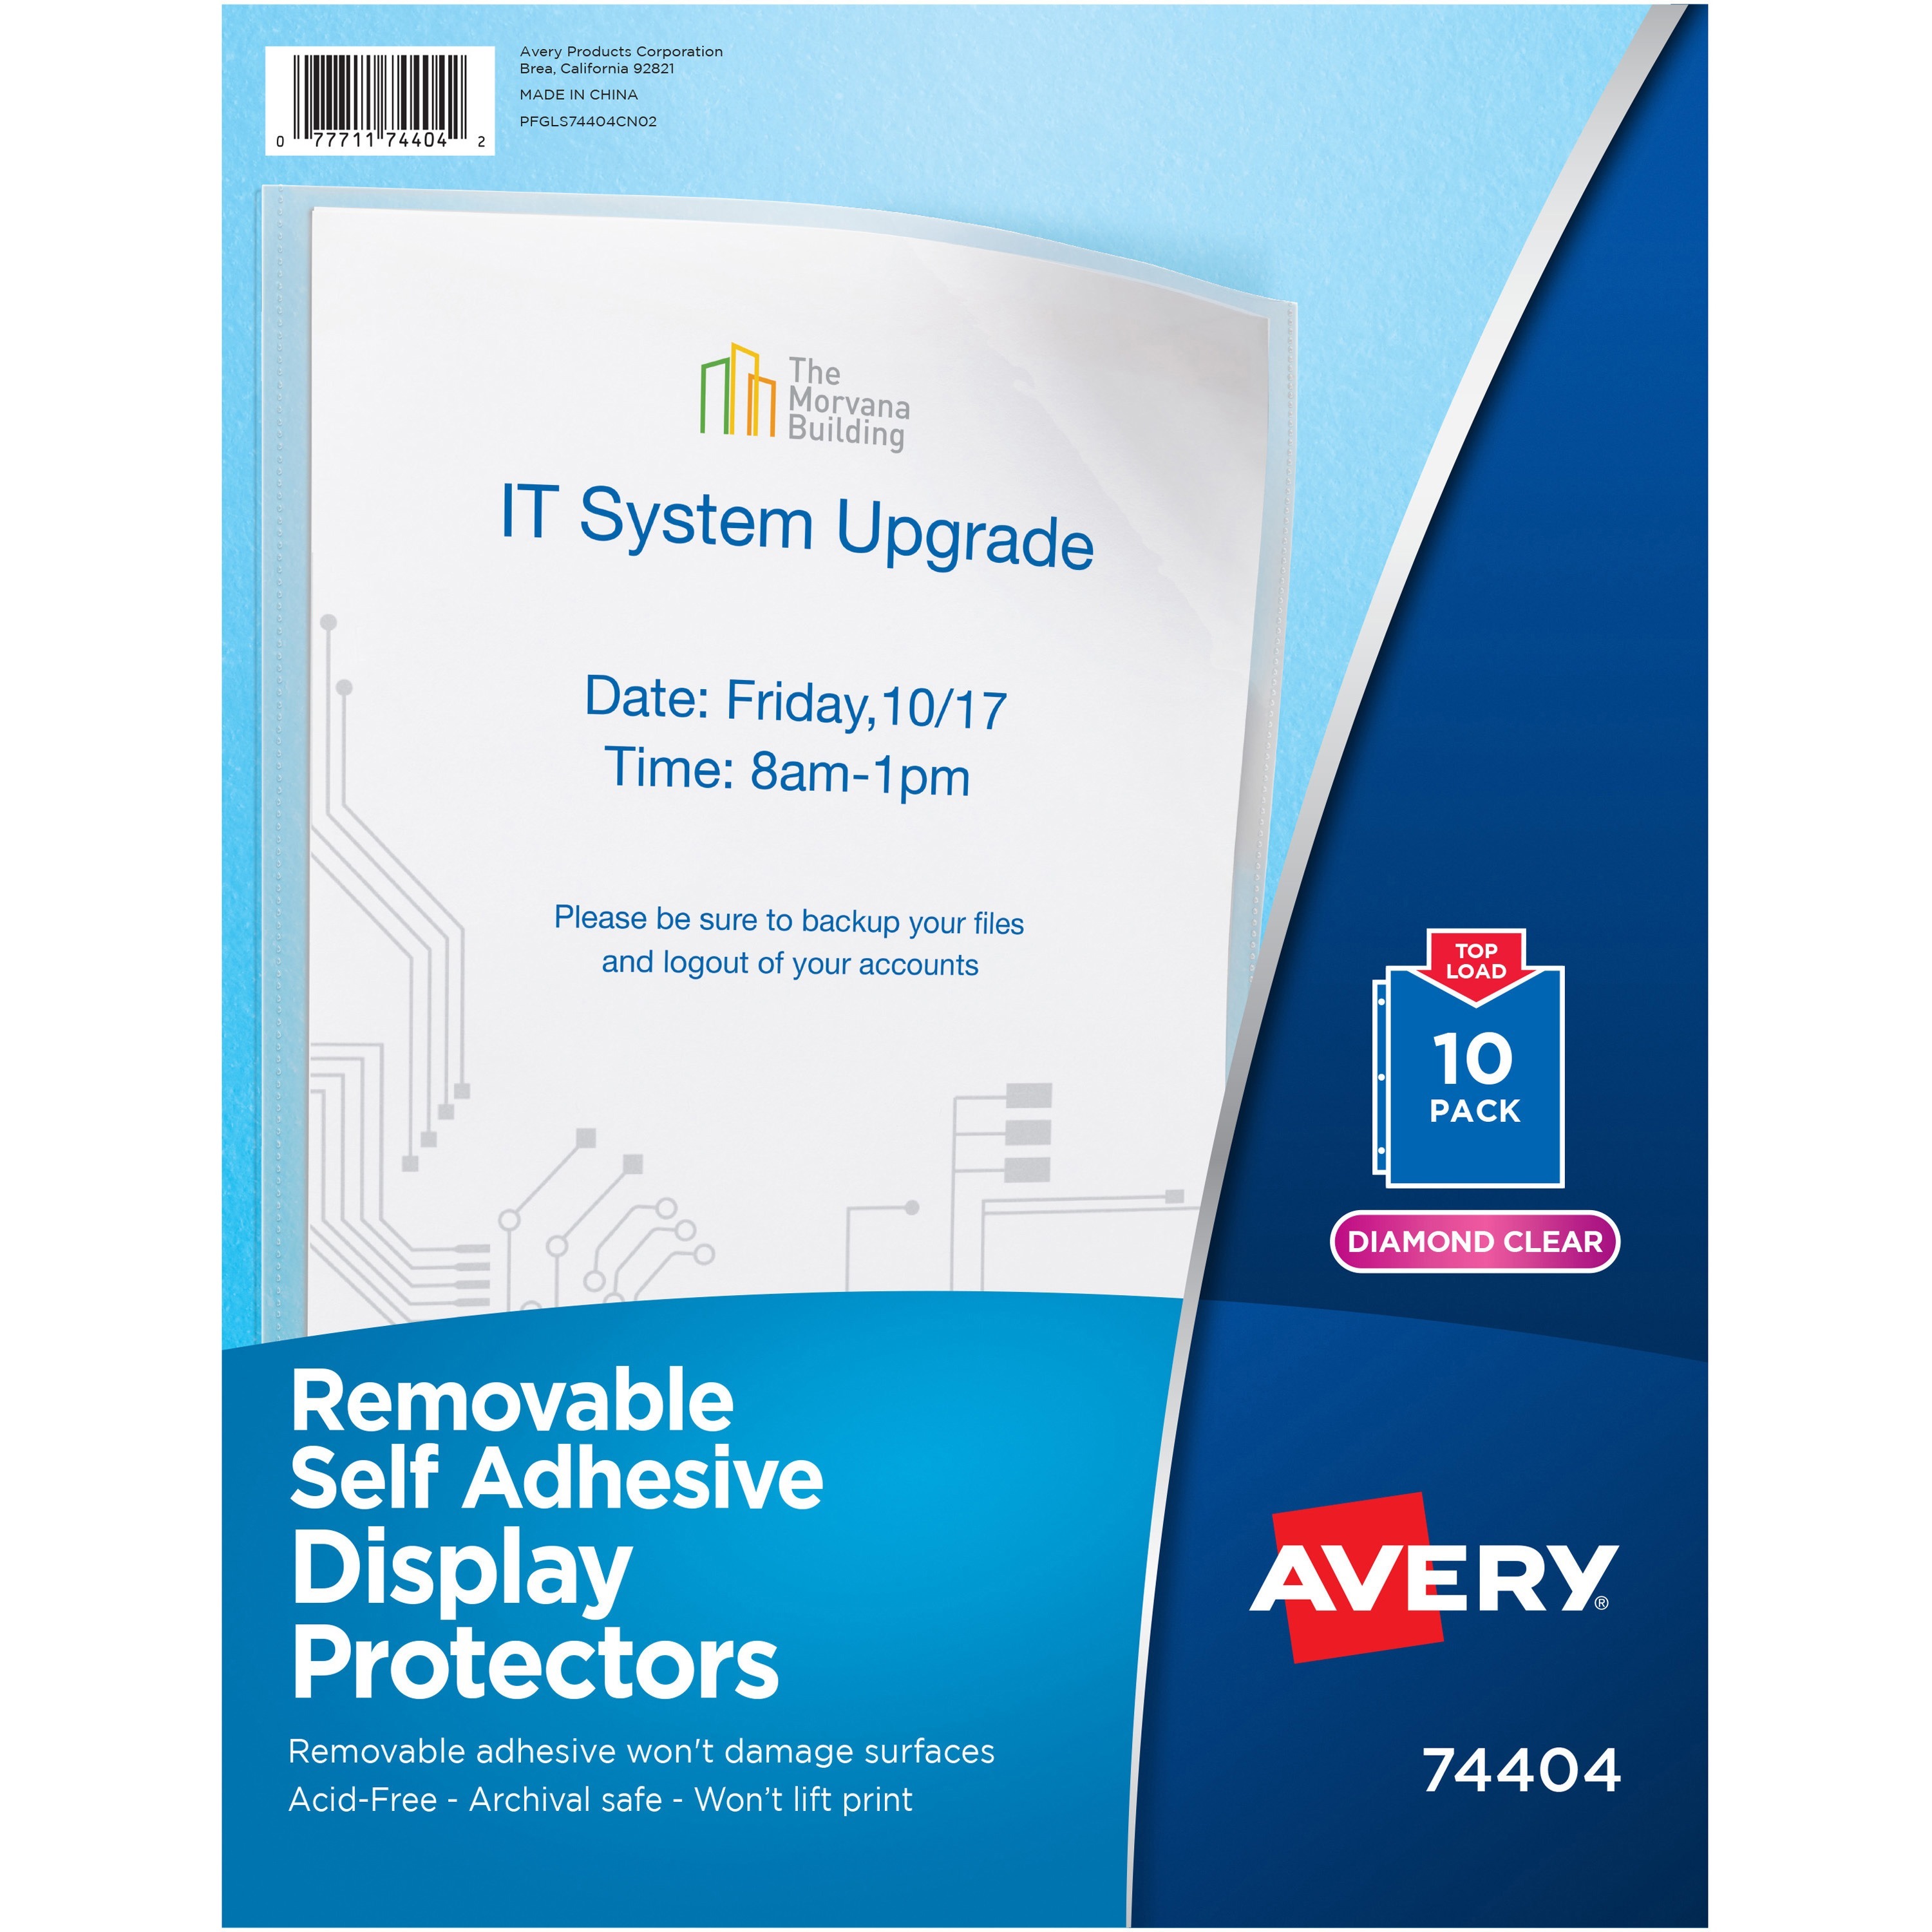 Avery Secure Top Sheet Protectors Super Heavyweight Diamond Clear Pack Of  25 - Office Depot